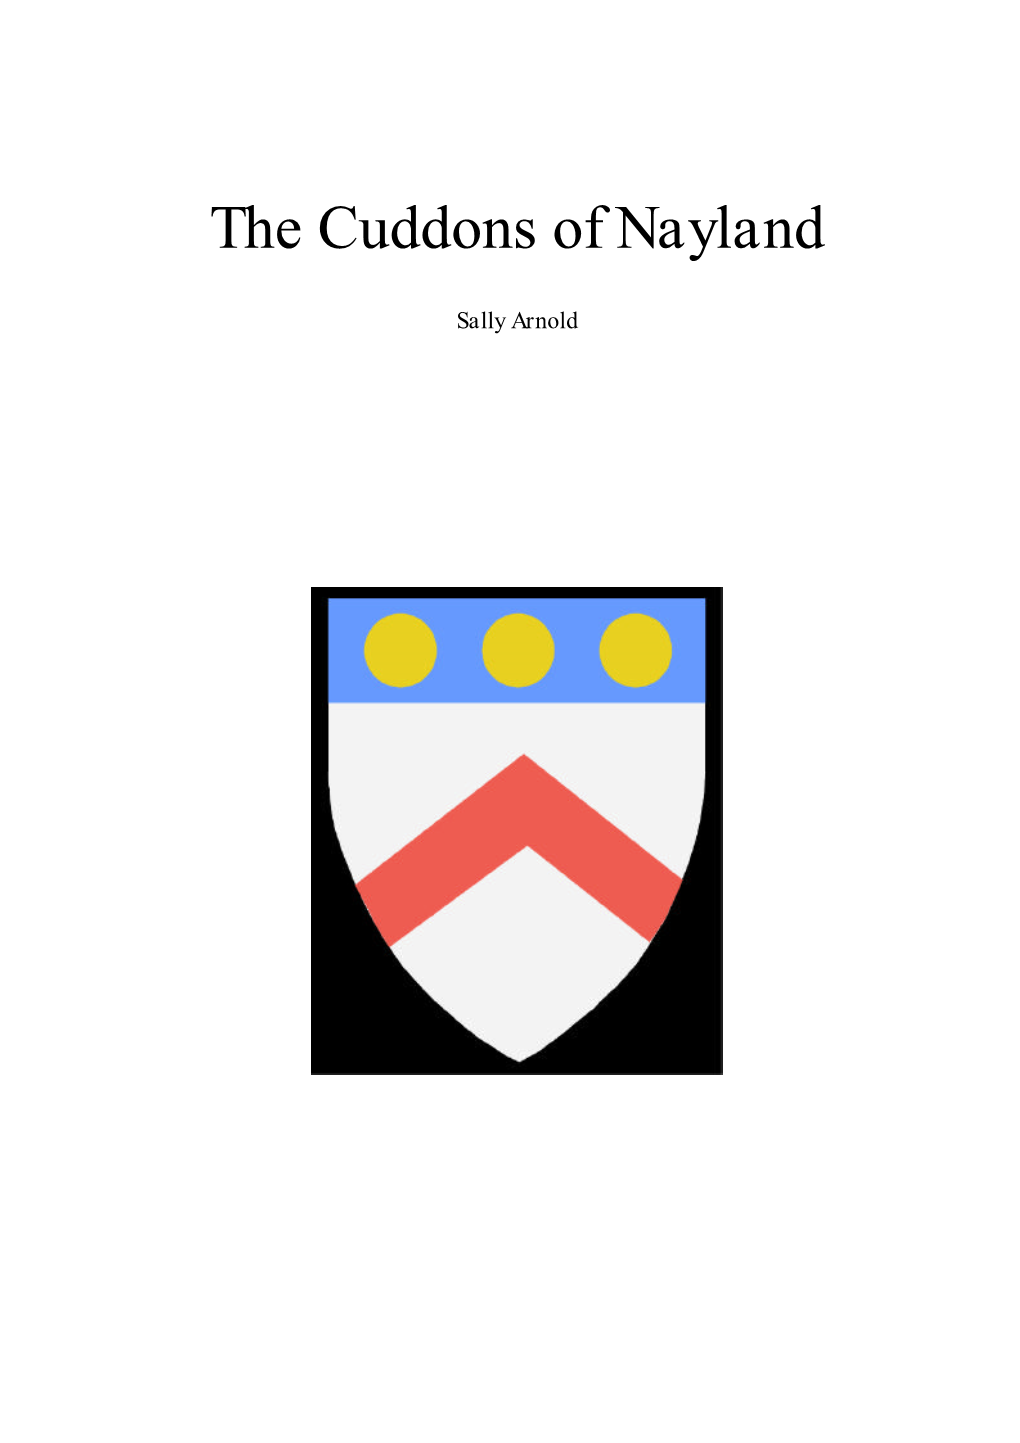 The Cuddons of Nayland